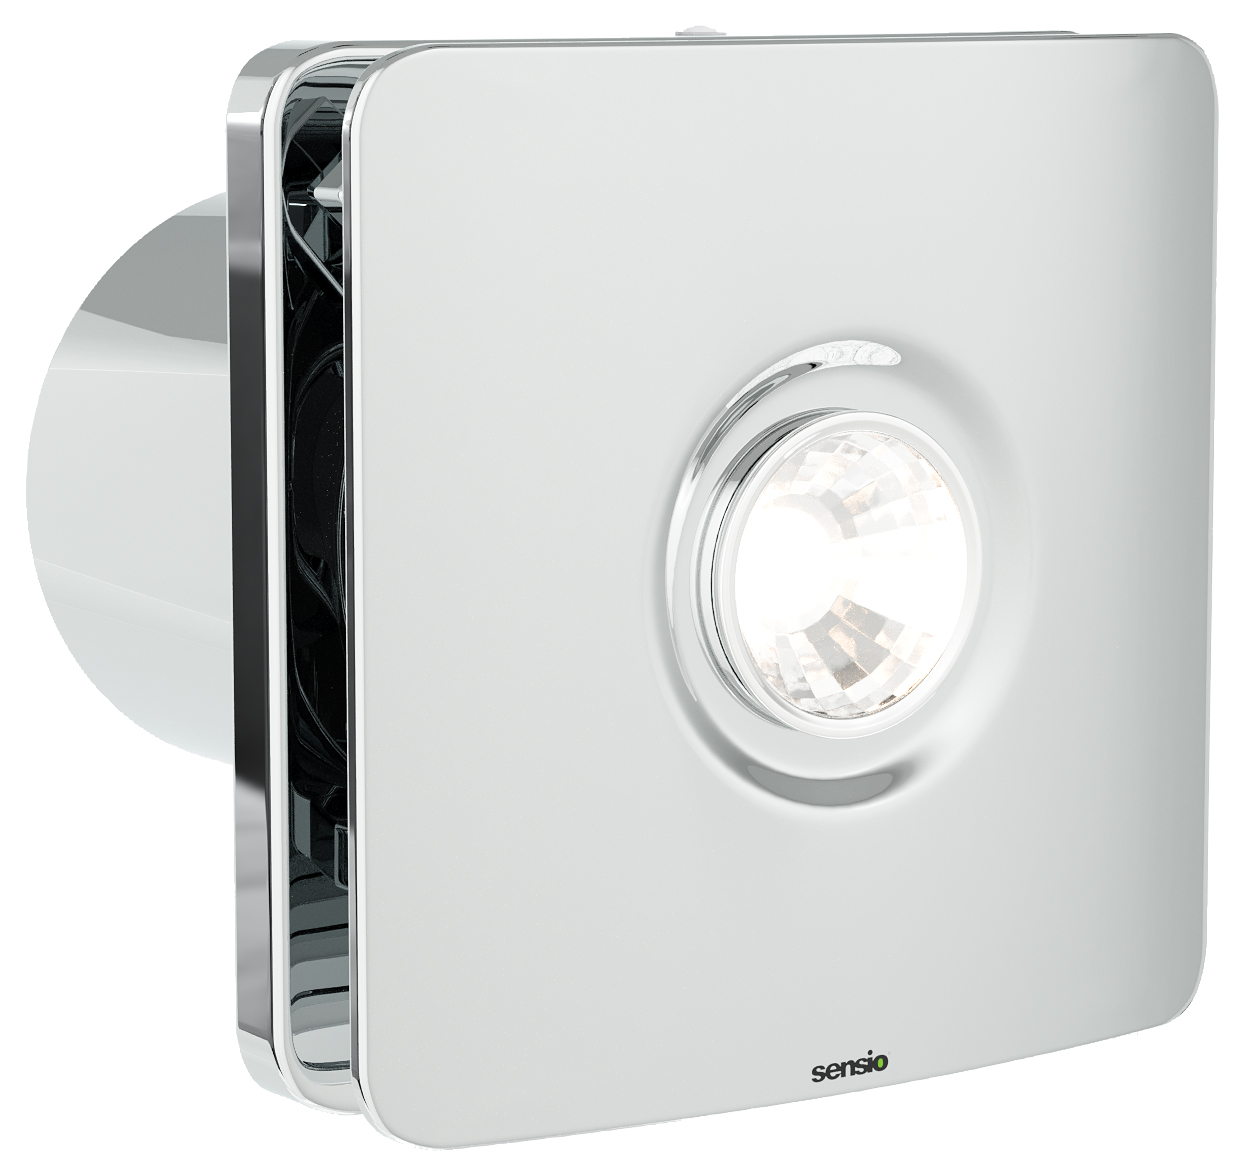 Sensio Remy Chrome Wall Ventilation Fan with Aquilo Ventilation Ducting Kit - 100mm